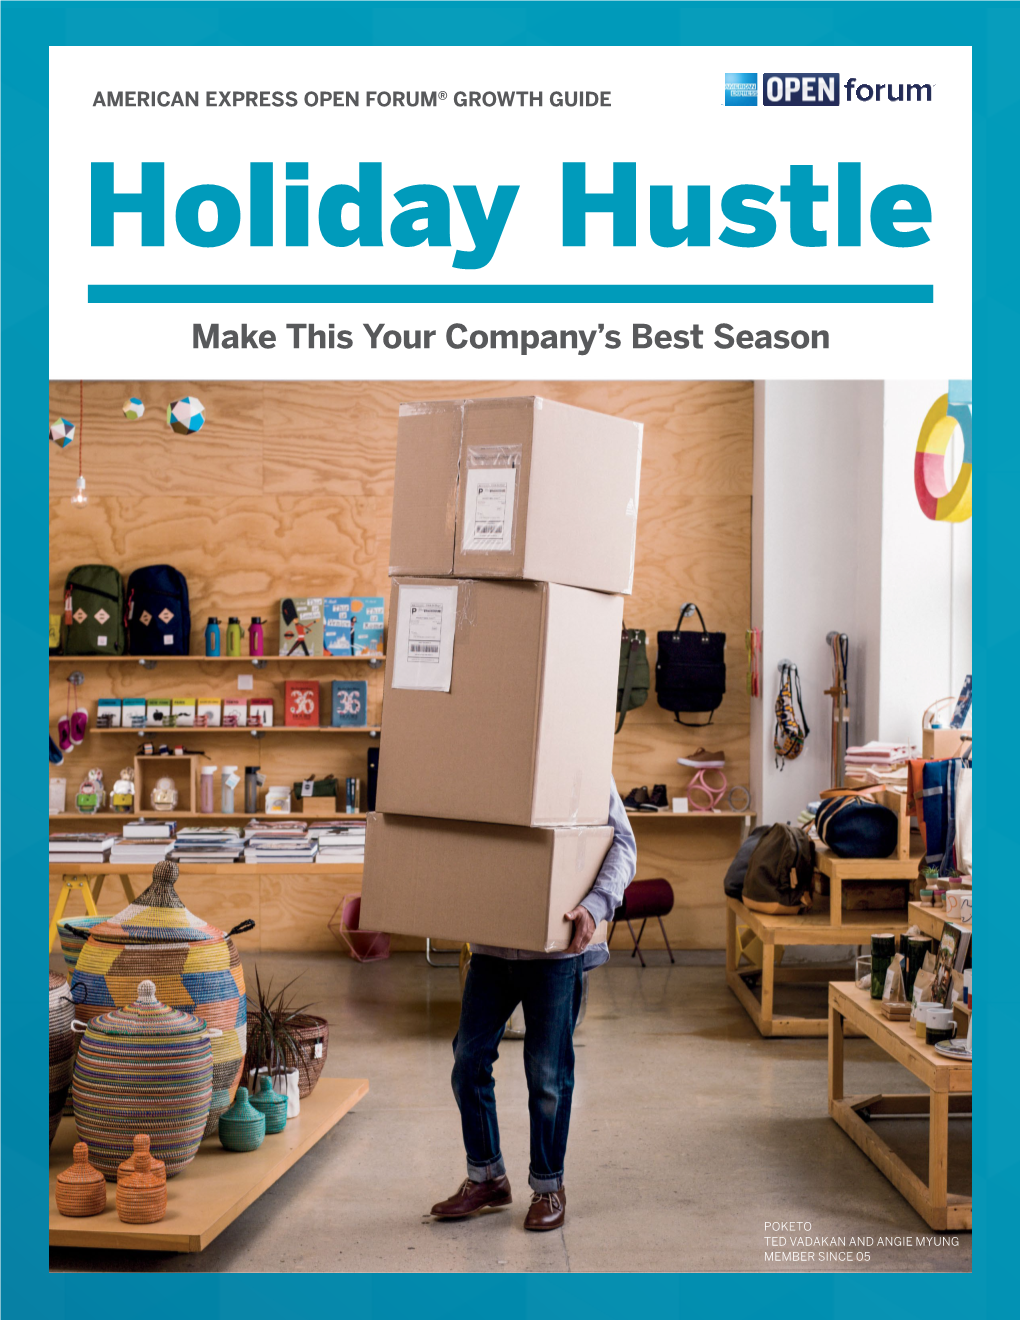 Make This Your Company's Best Season